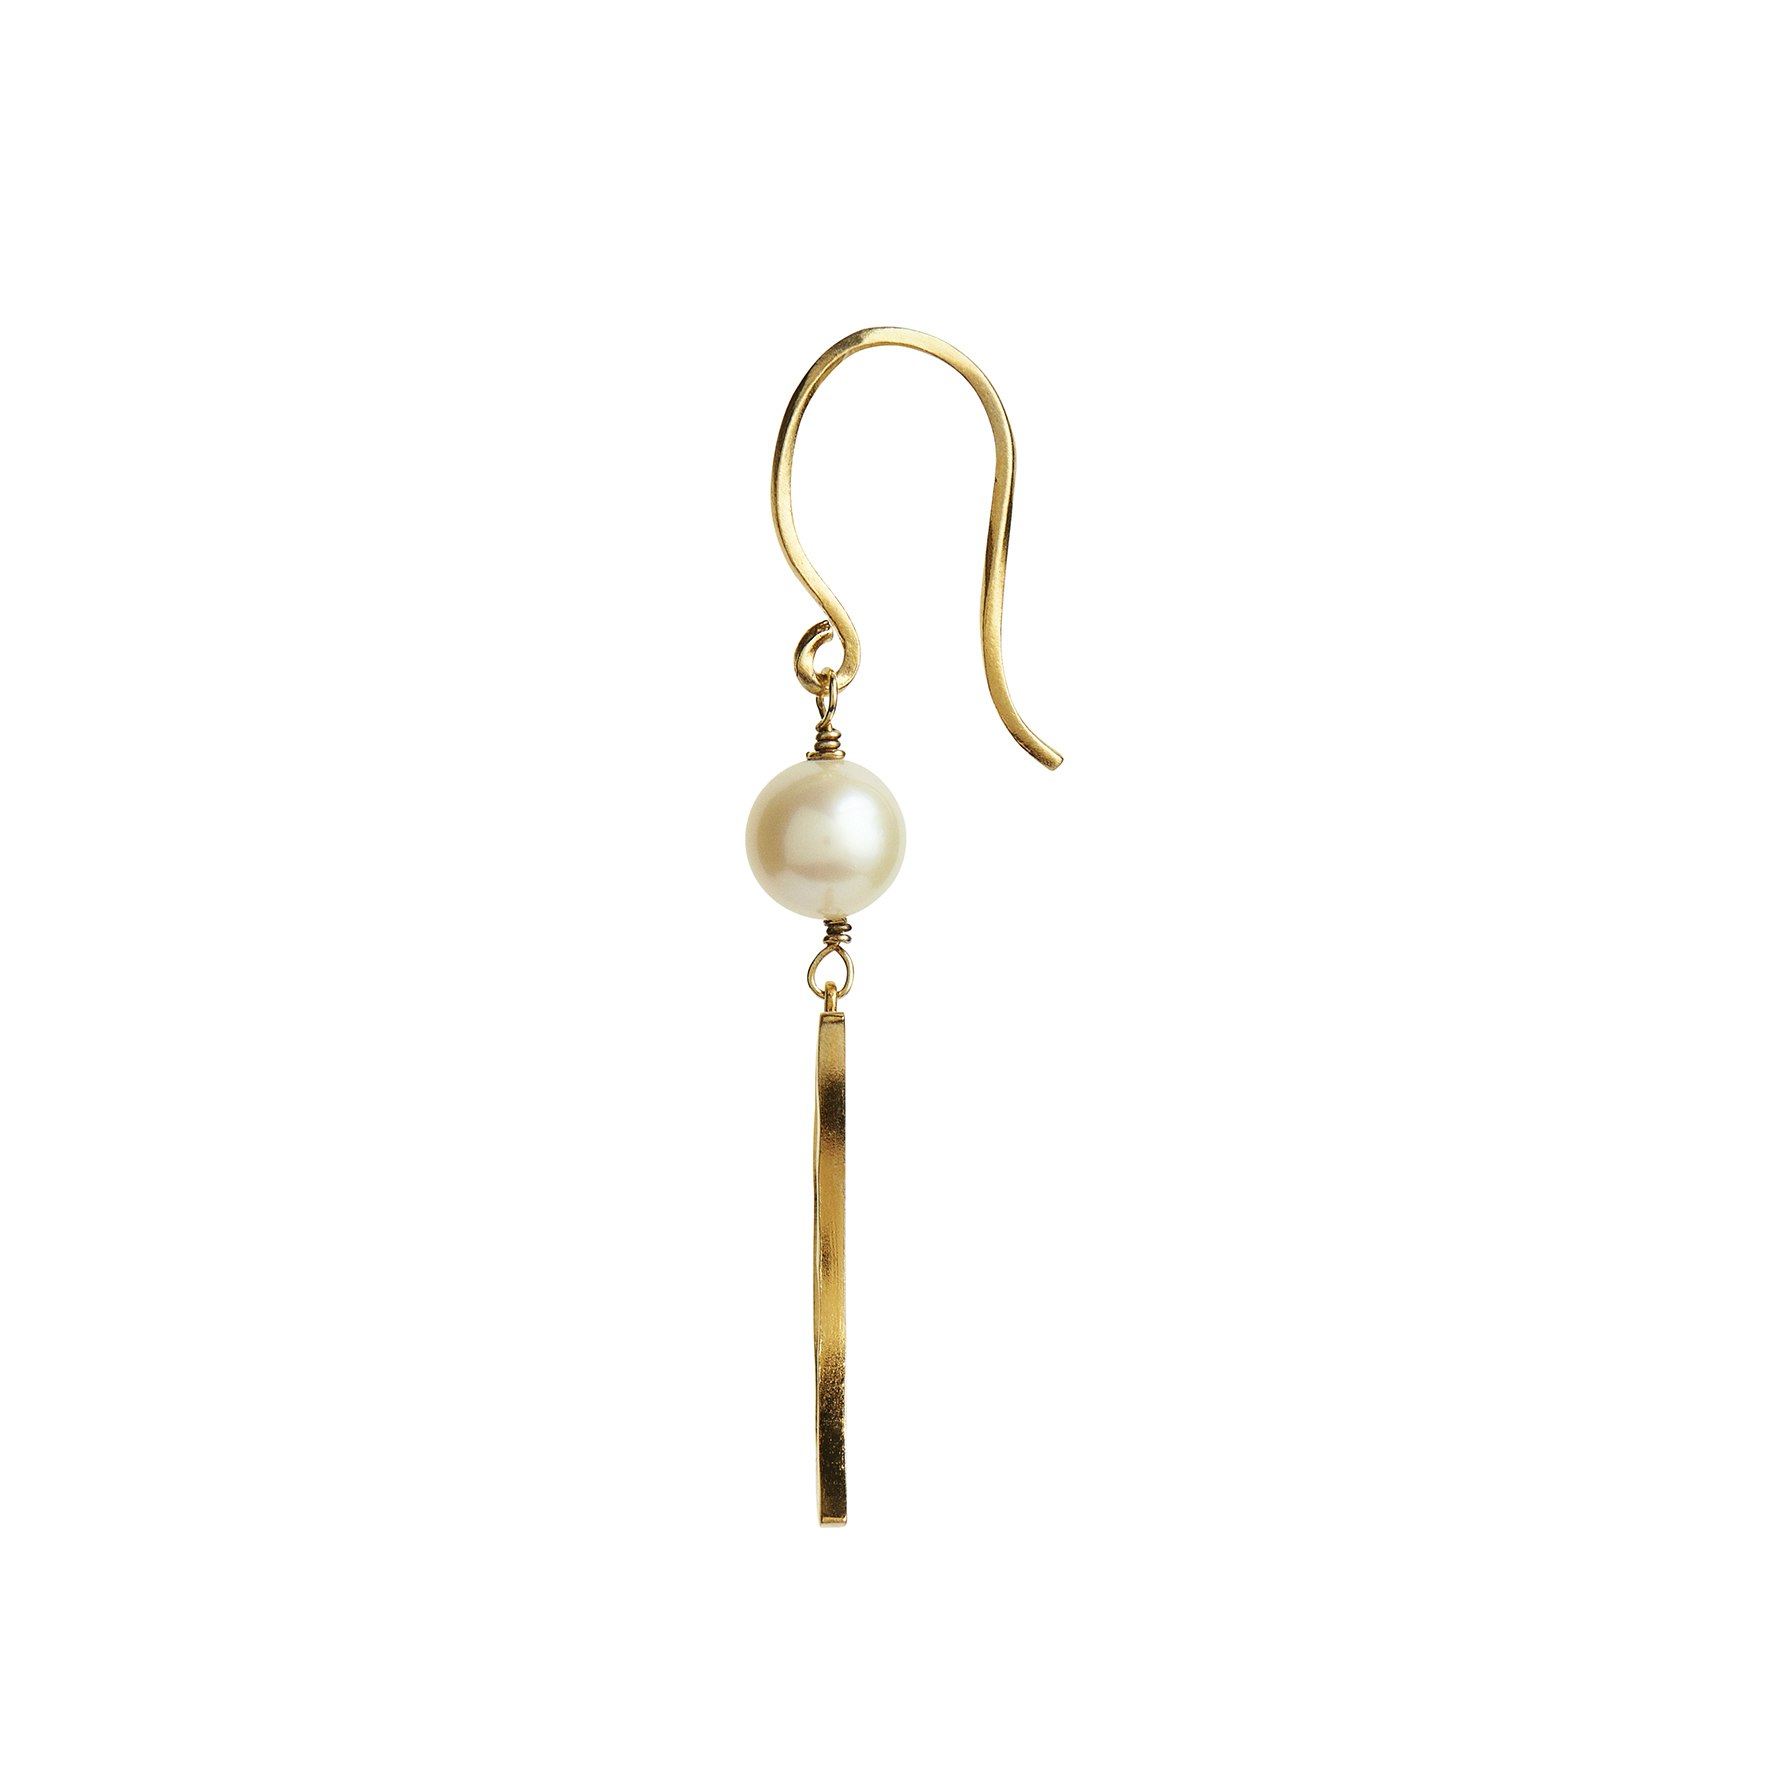 Bella Moon Earring With Pearl from STINE A Jewelry in Goldplated-Silver Sterling 925